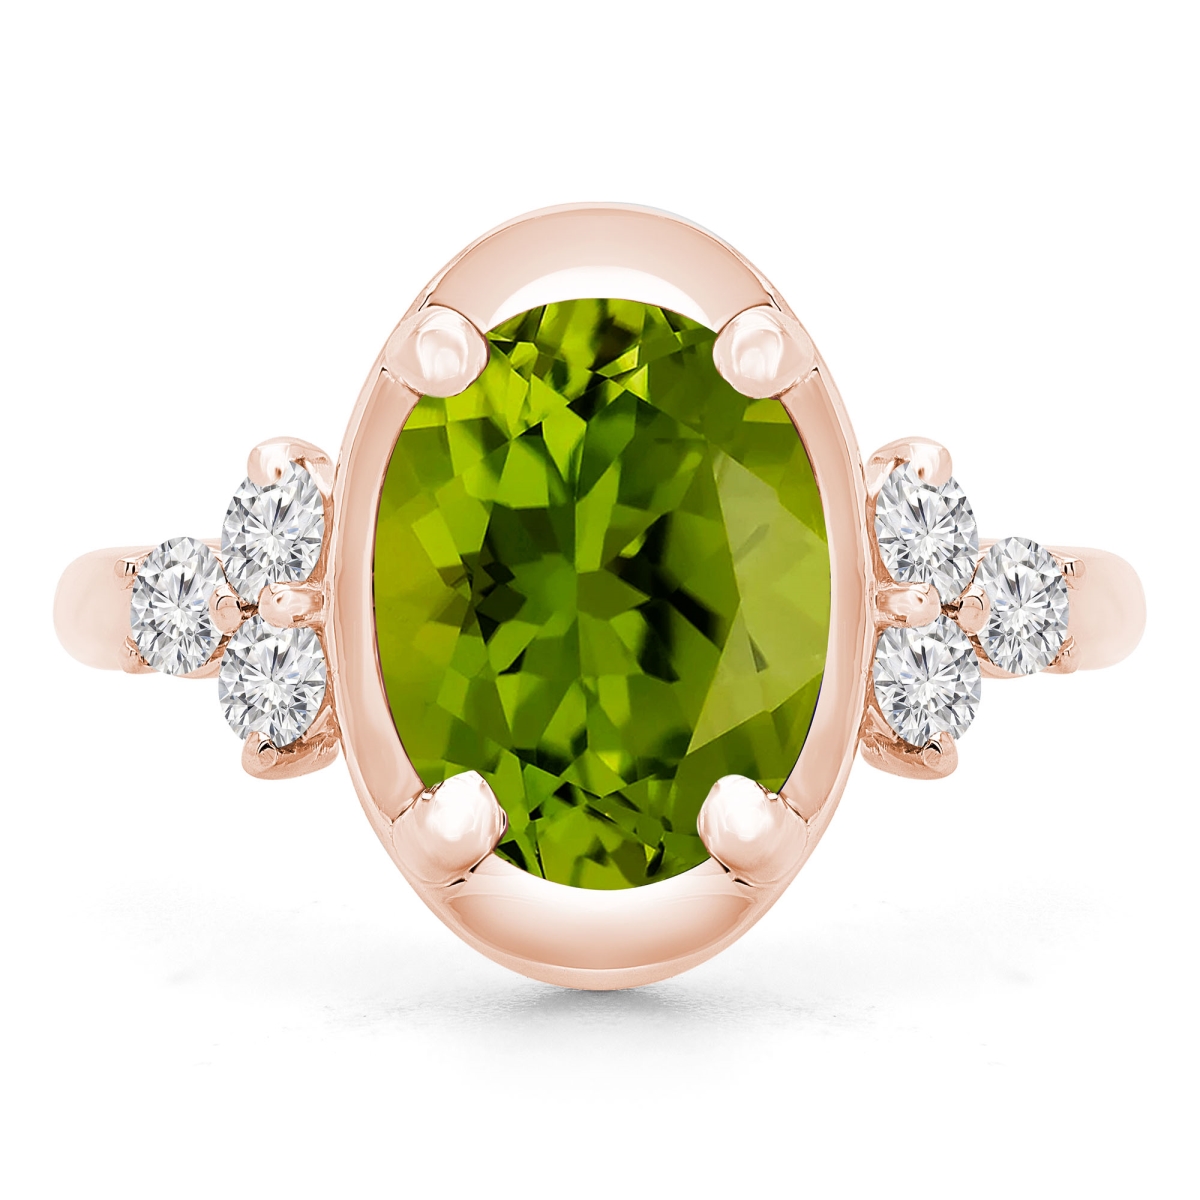 Picture of Majesty Diamonds MD190412-4 3.9 CTW Oval Green Peridot Cocktail Ring in 14K Rose Gold - Size 4